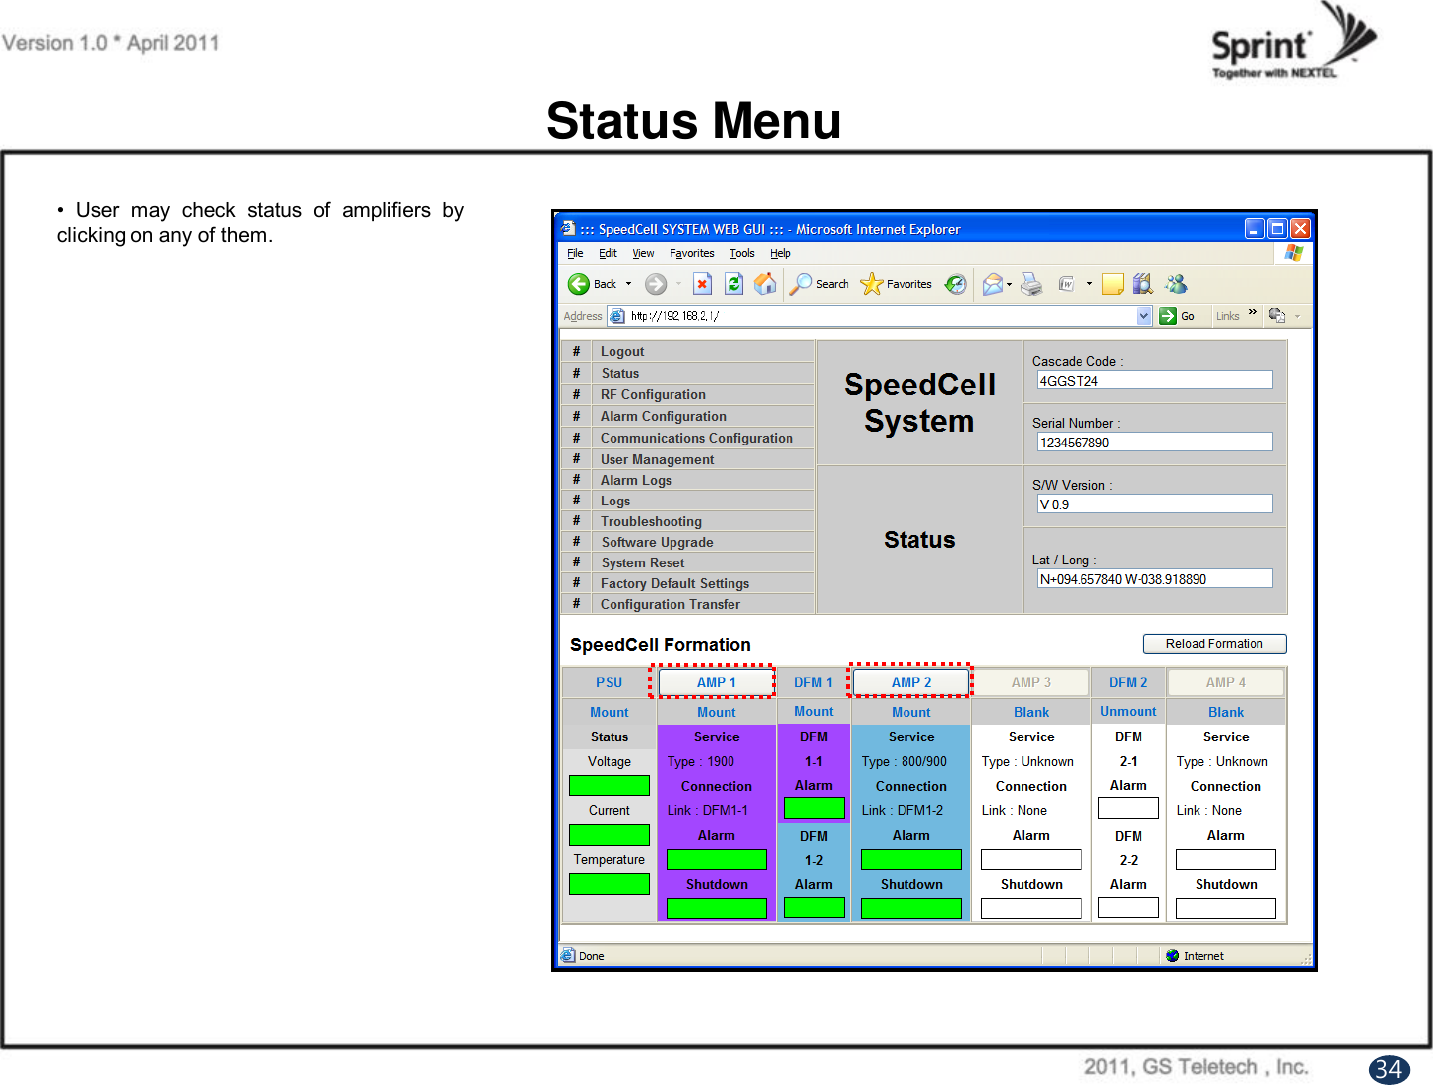 Status Menu• User may check status of amplifiers byclicking on any of them.34